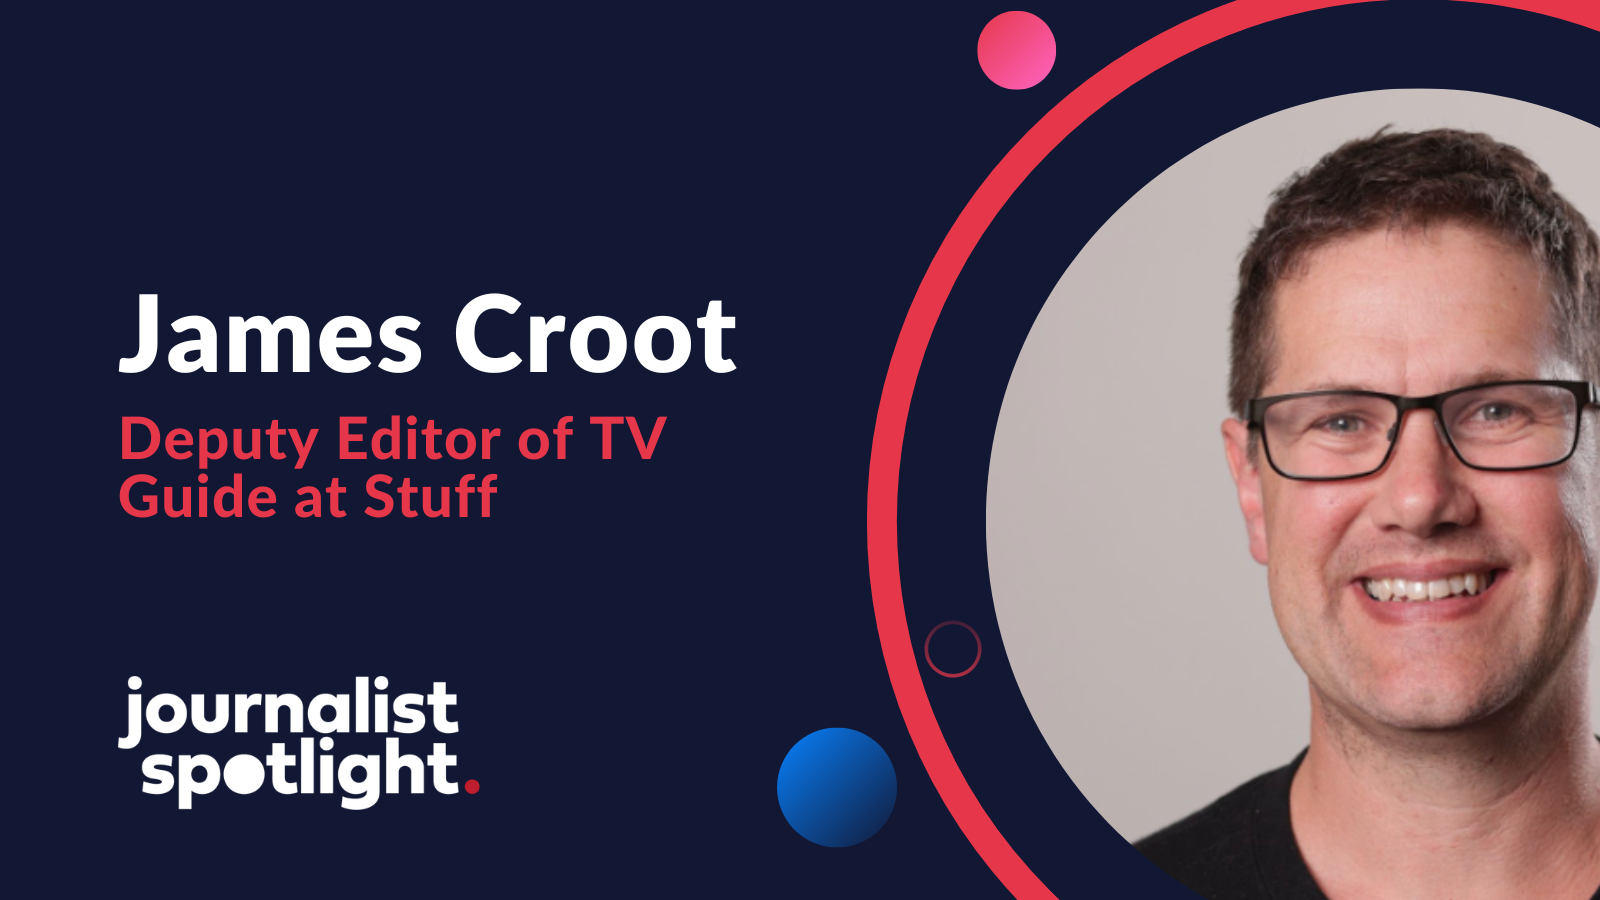 Journalist Spotlight | Interview with James Croot, Deputy Editor of TV Guide at Stuff